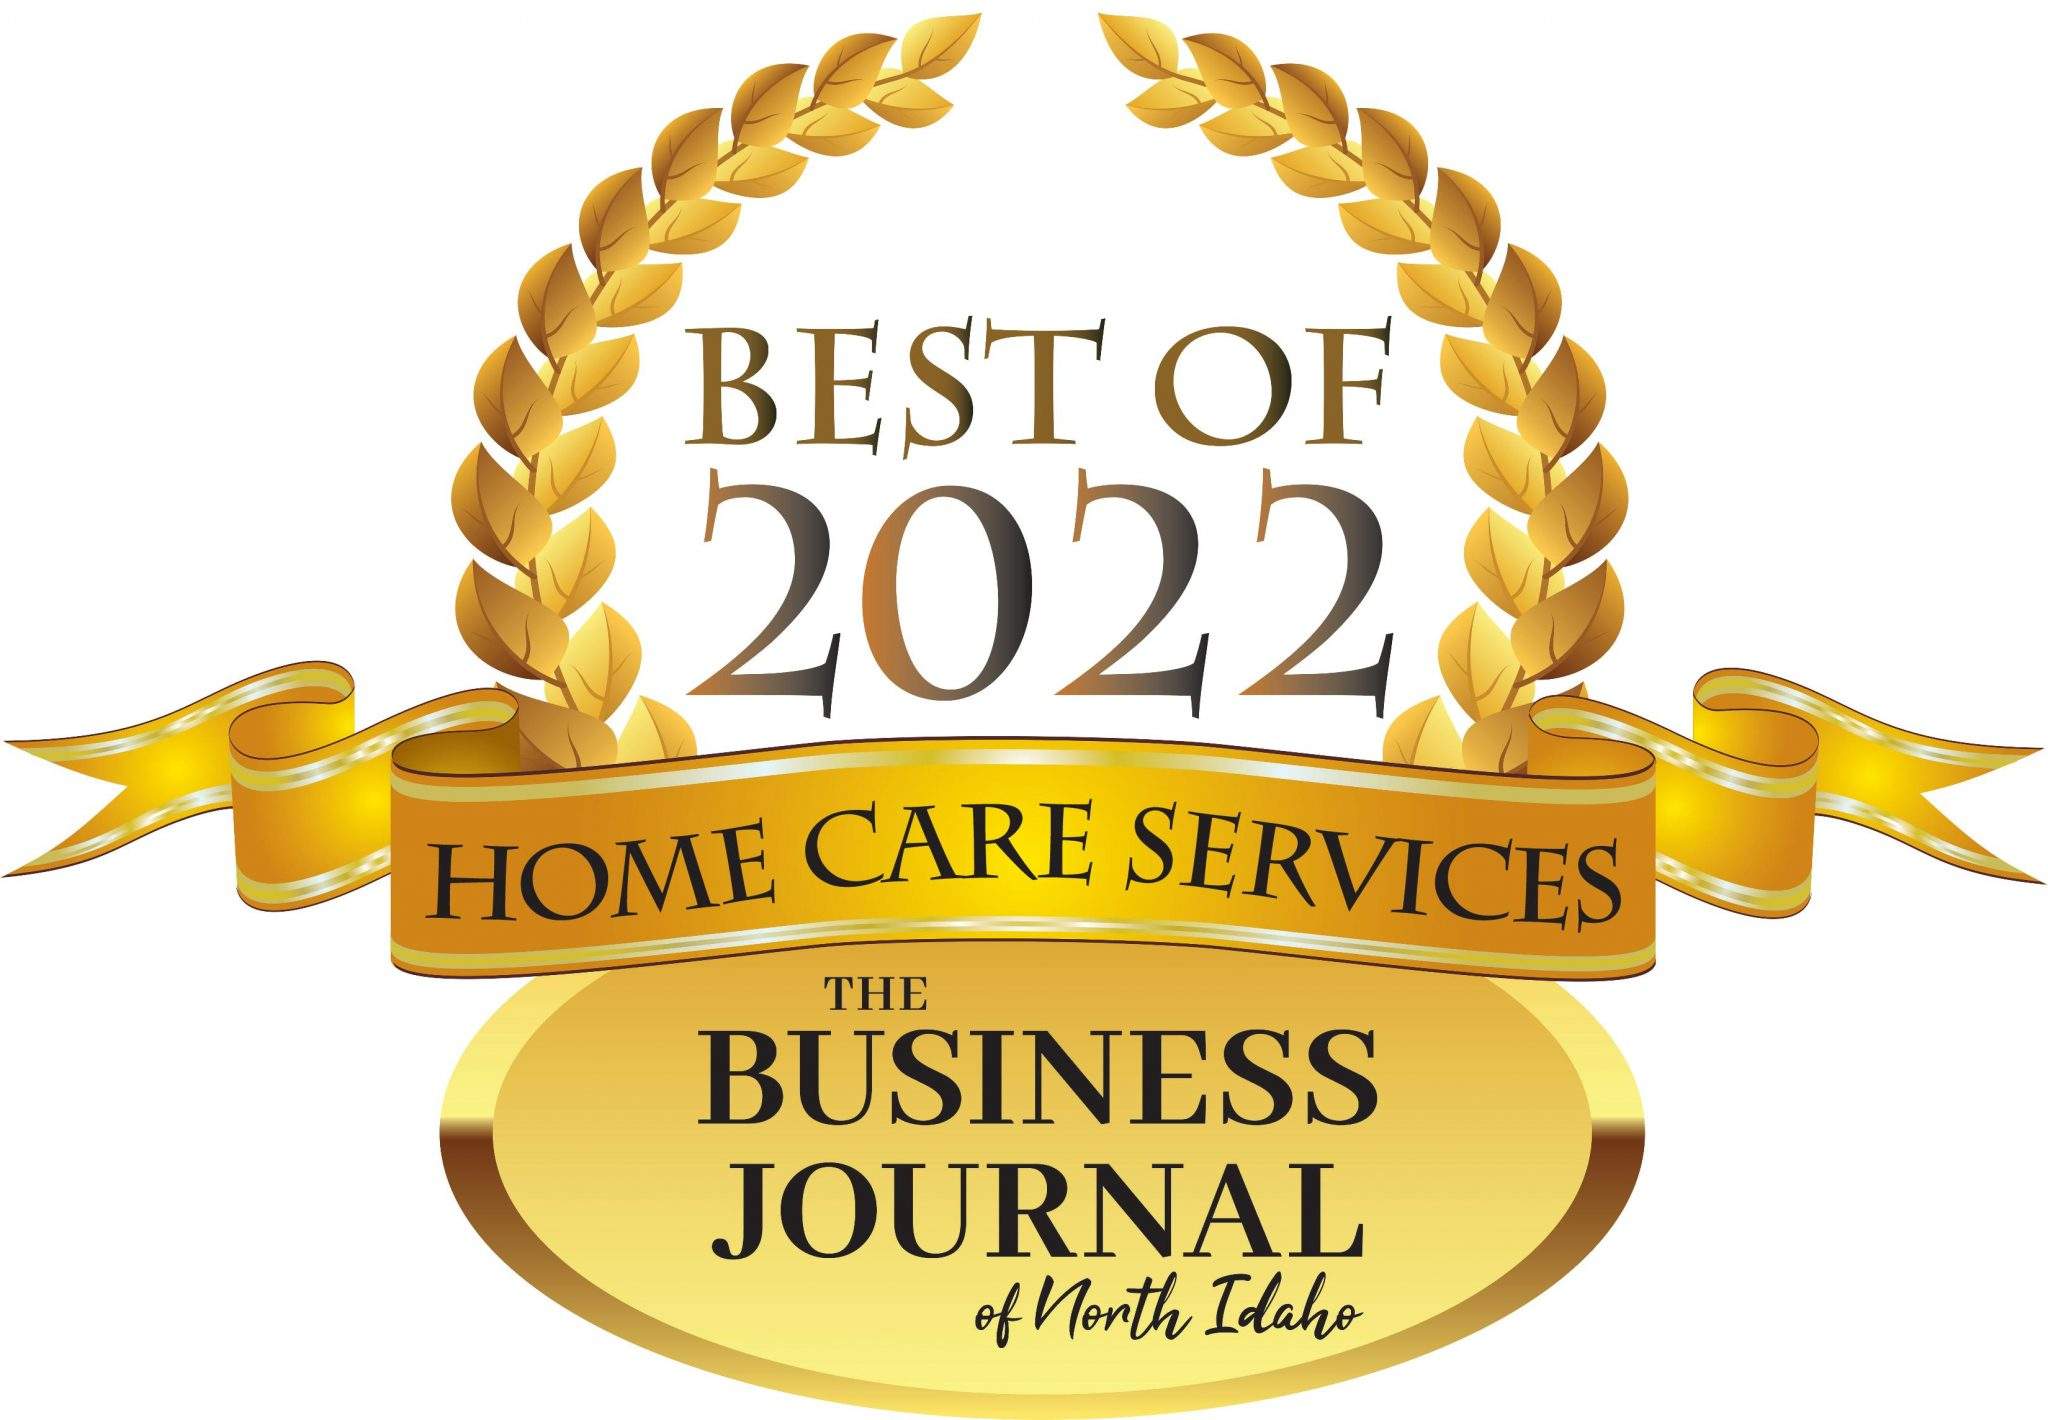 Best of 2022 Home Care The Business Journal of North Idaho